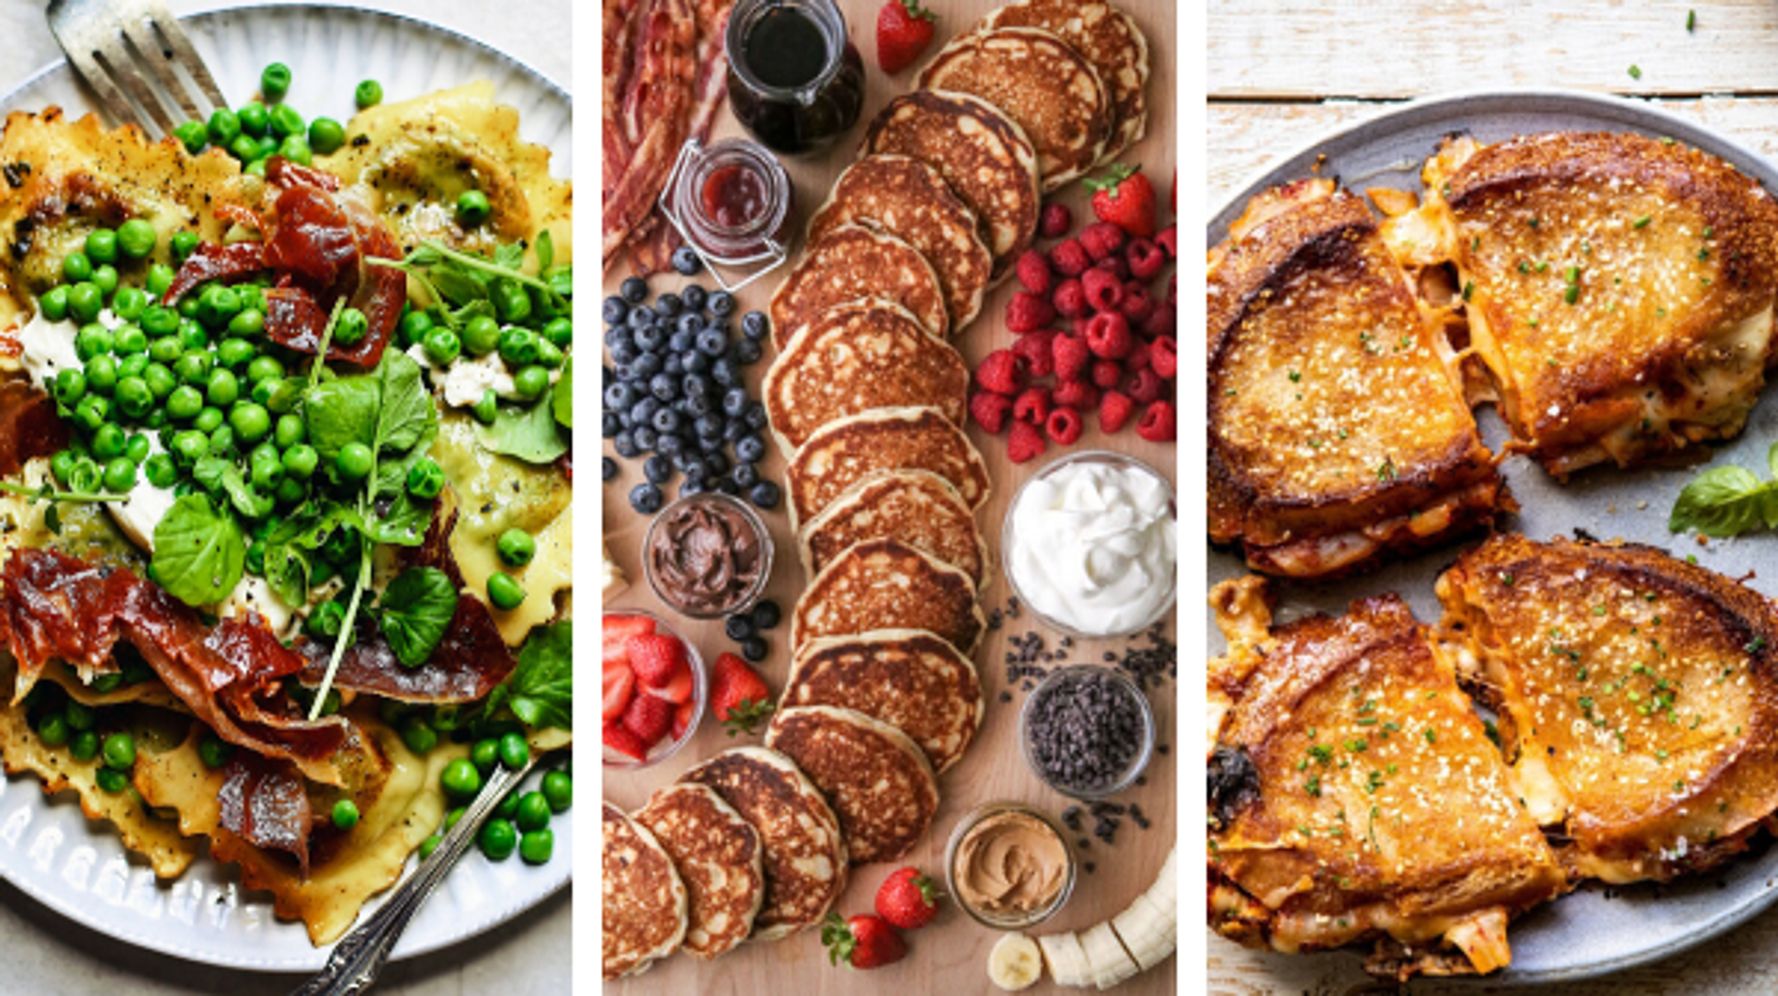 The 10 Most Popular Instagram Recipes From February 2020 | HuffPost ...